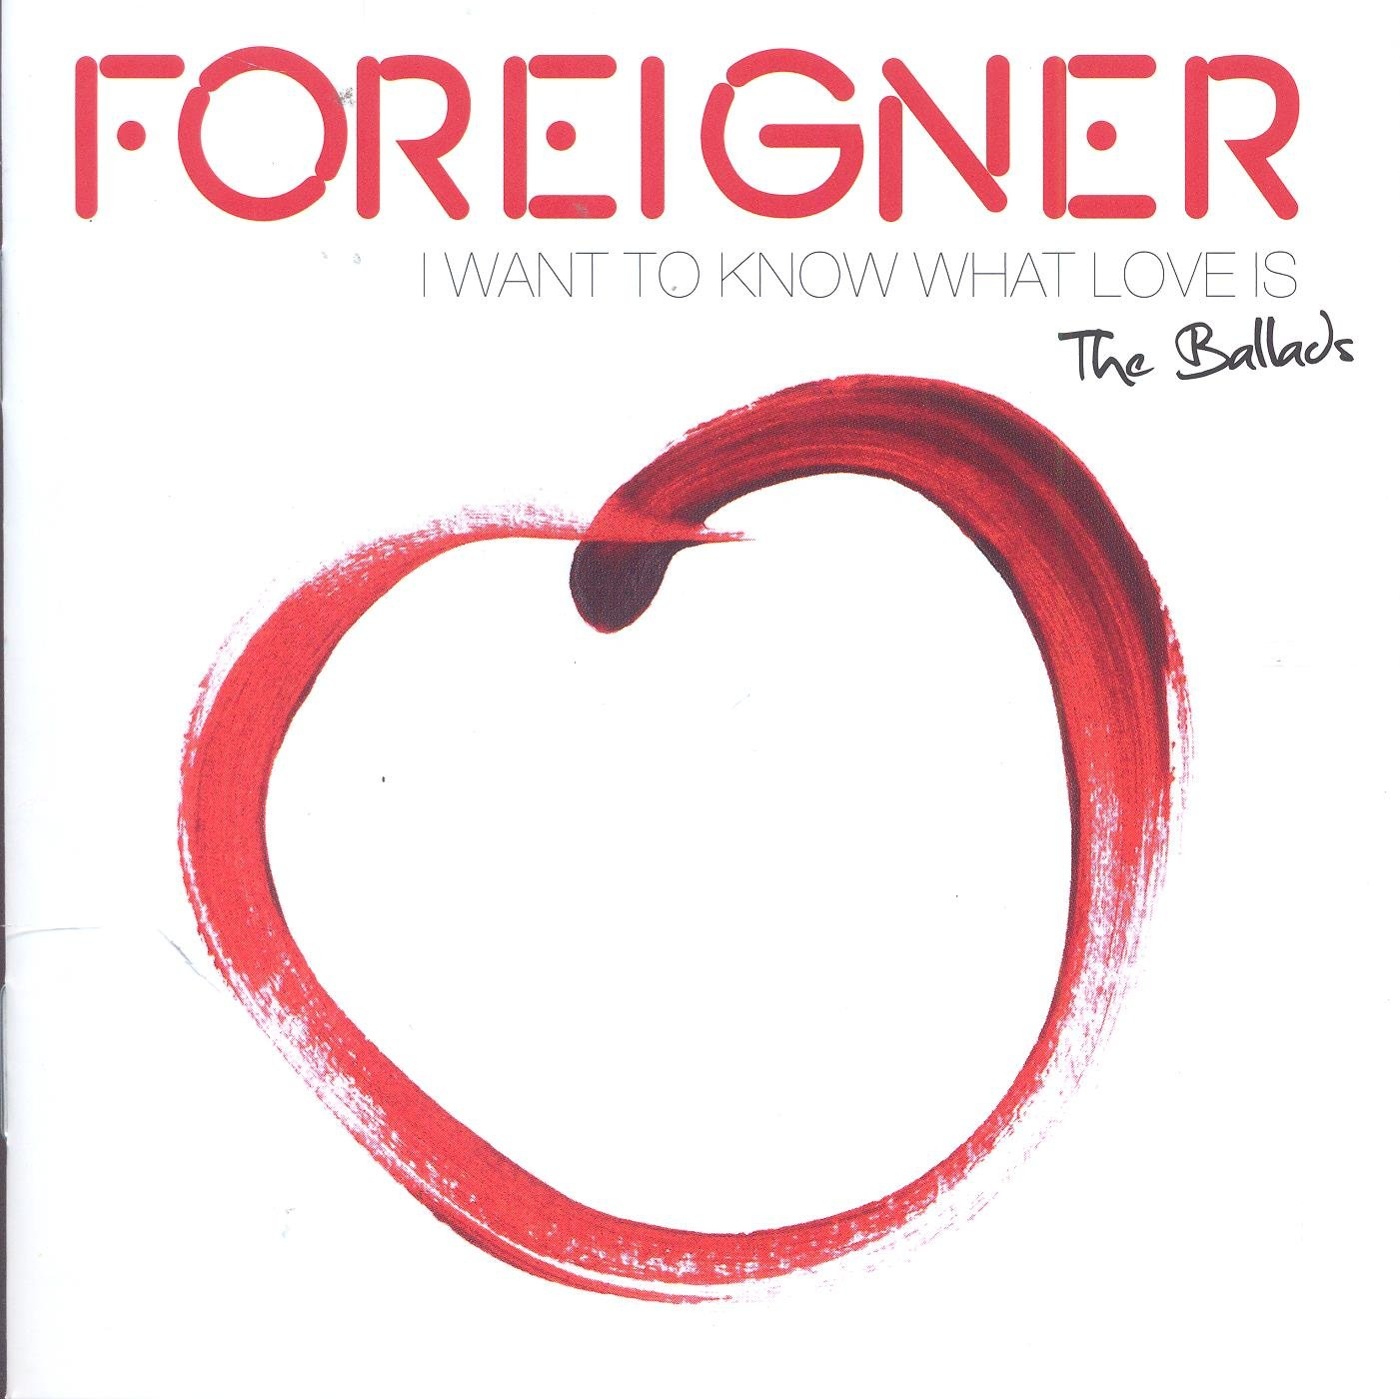 L know what you want. Foreigner - i want to know what Love is. Foreigner 1977. Foreigner - i want to know what Love is фото. I want to know.